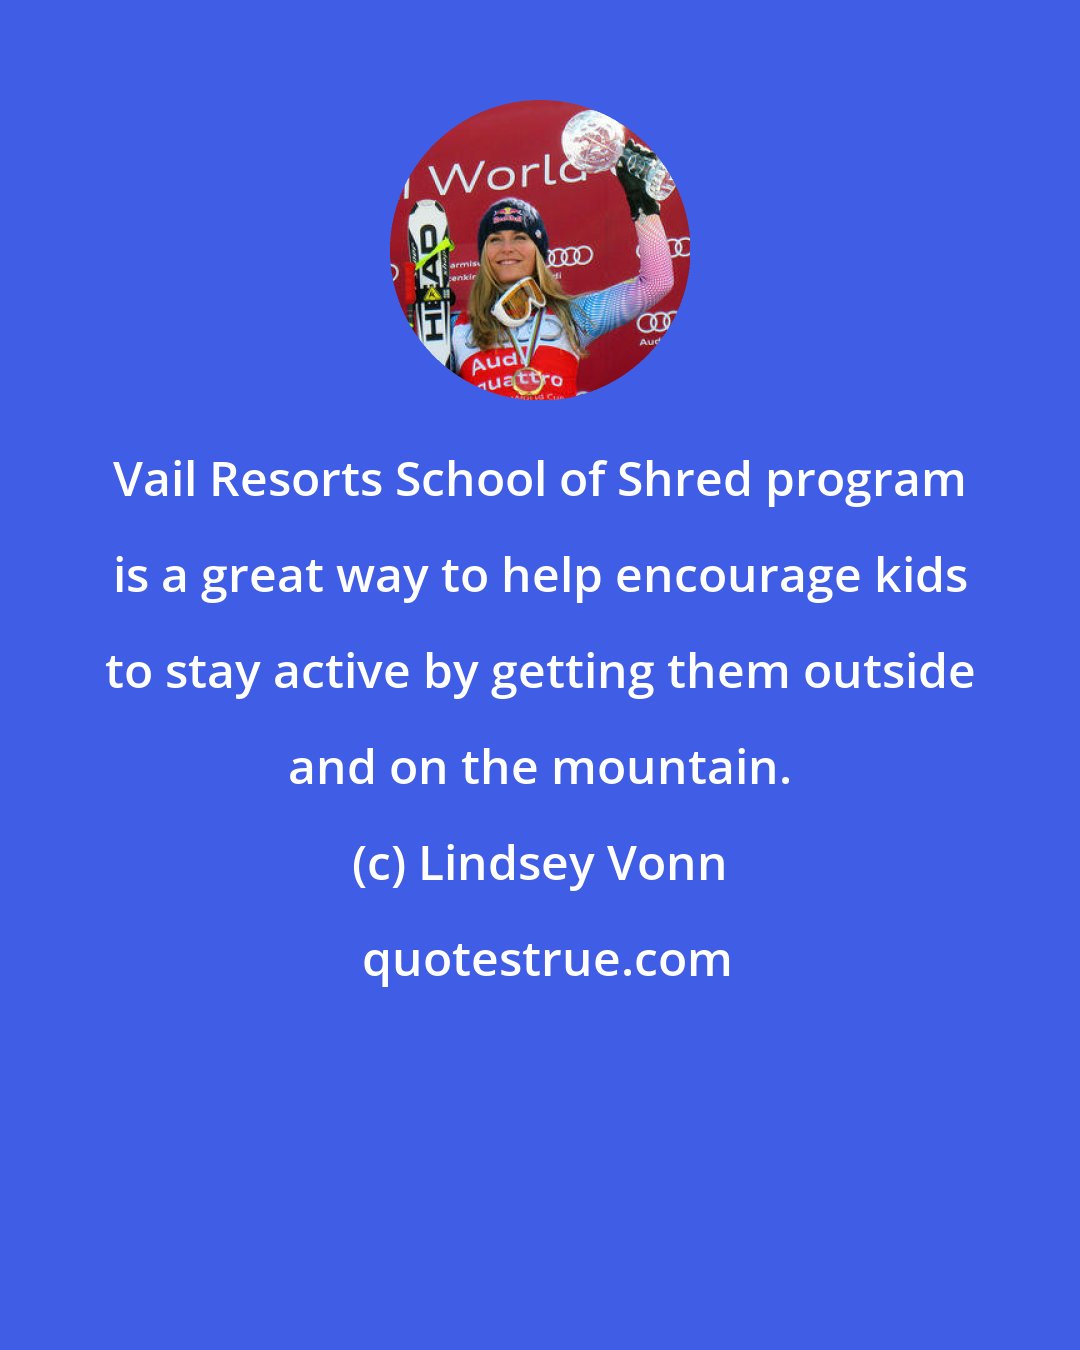 Lindsey Vonn: Vail Resorts School of Shred program is a great way to help encourage kids to stay active by getting them outside and on the mountain.